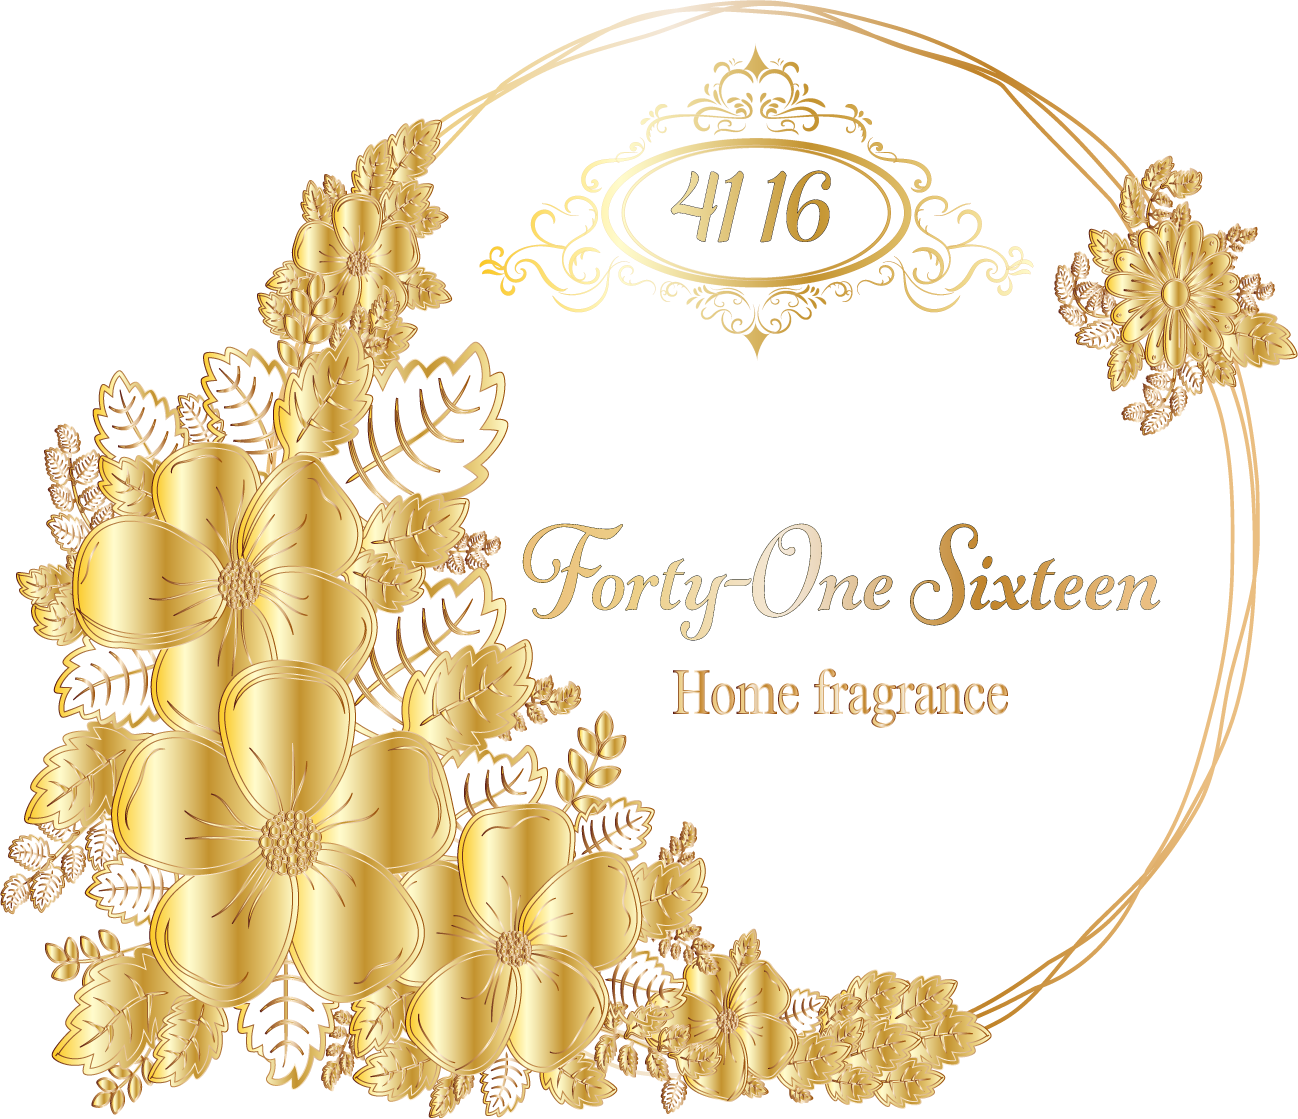 Forty-One Sixteen Home Fragrance